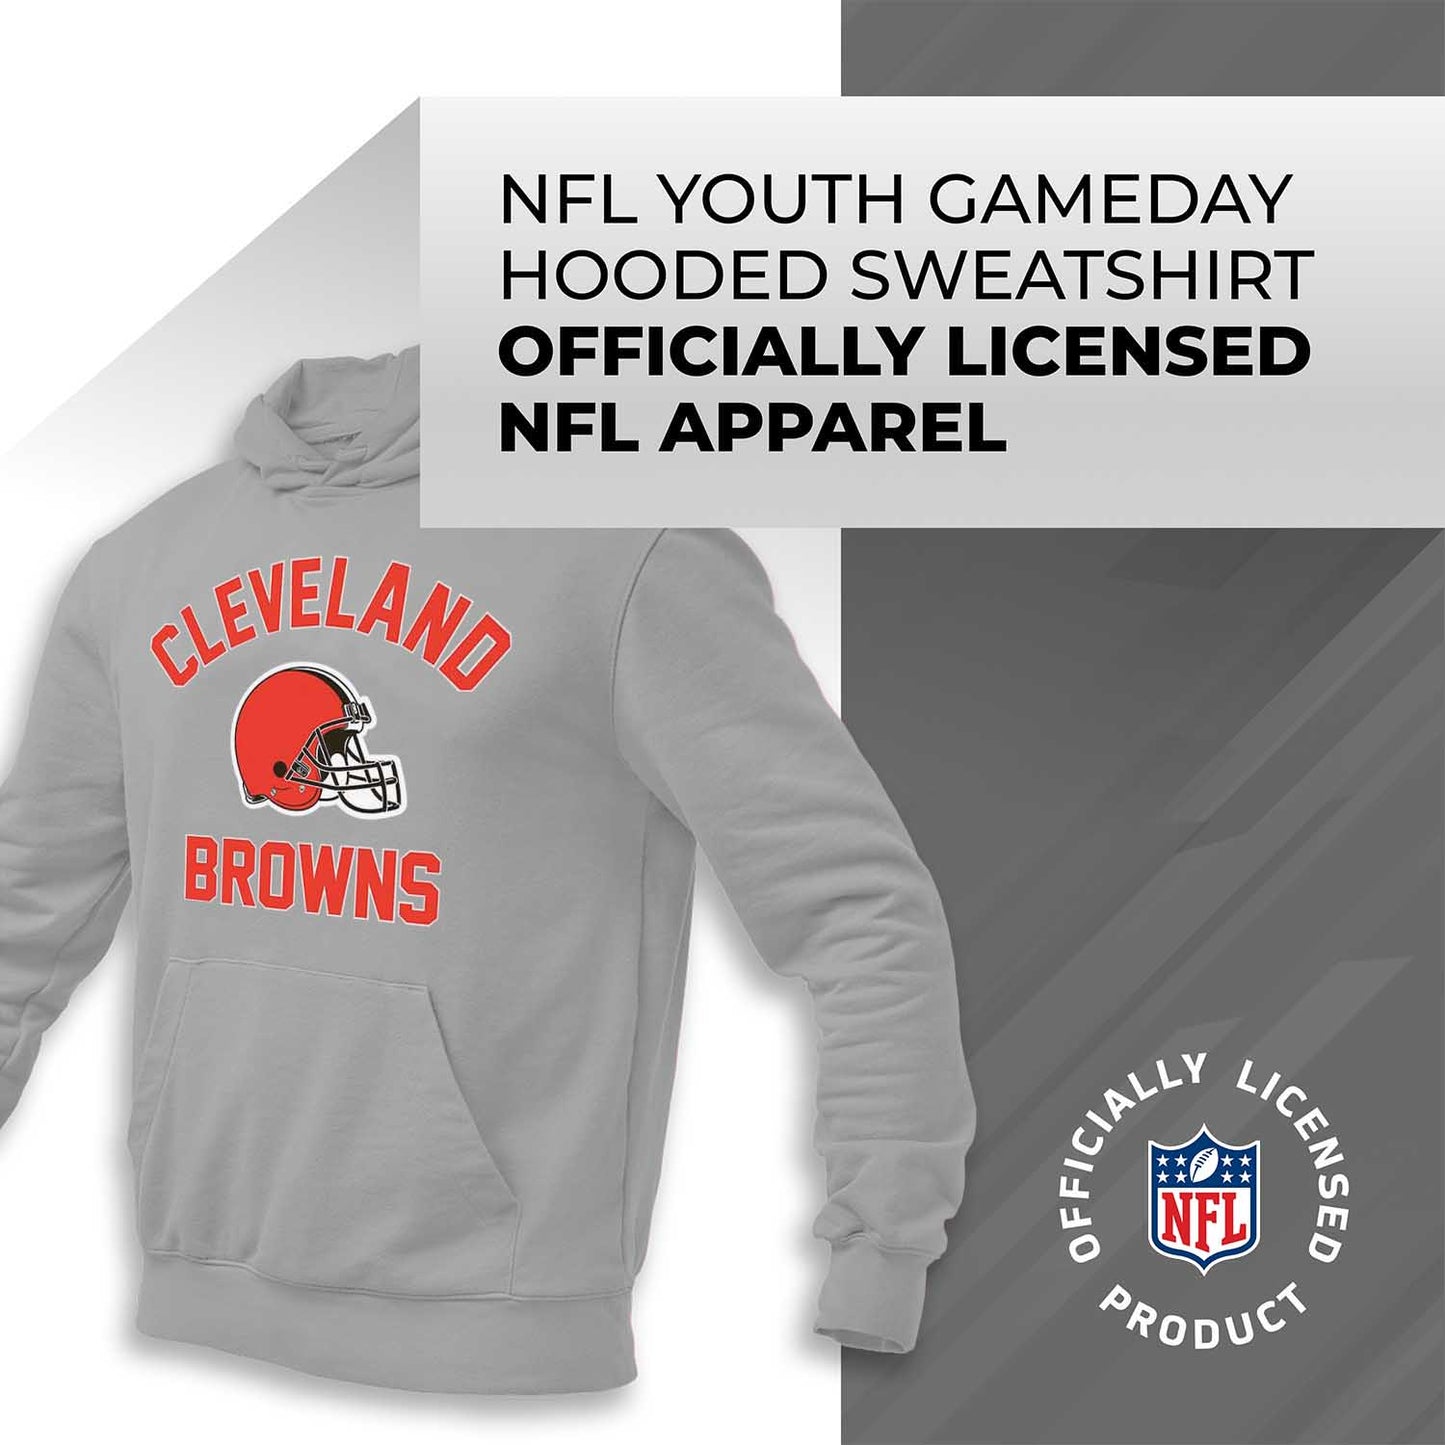 Cleveland Browns NFL Youth Gameday Hooded Sweatshirt - Gray